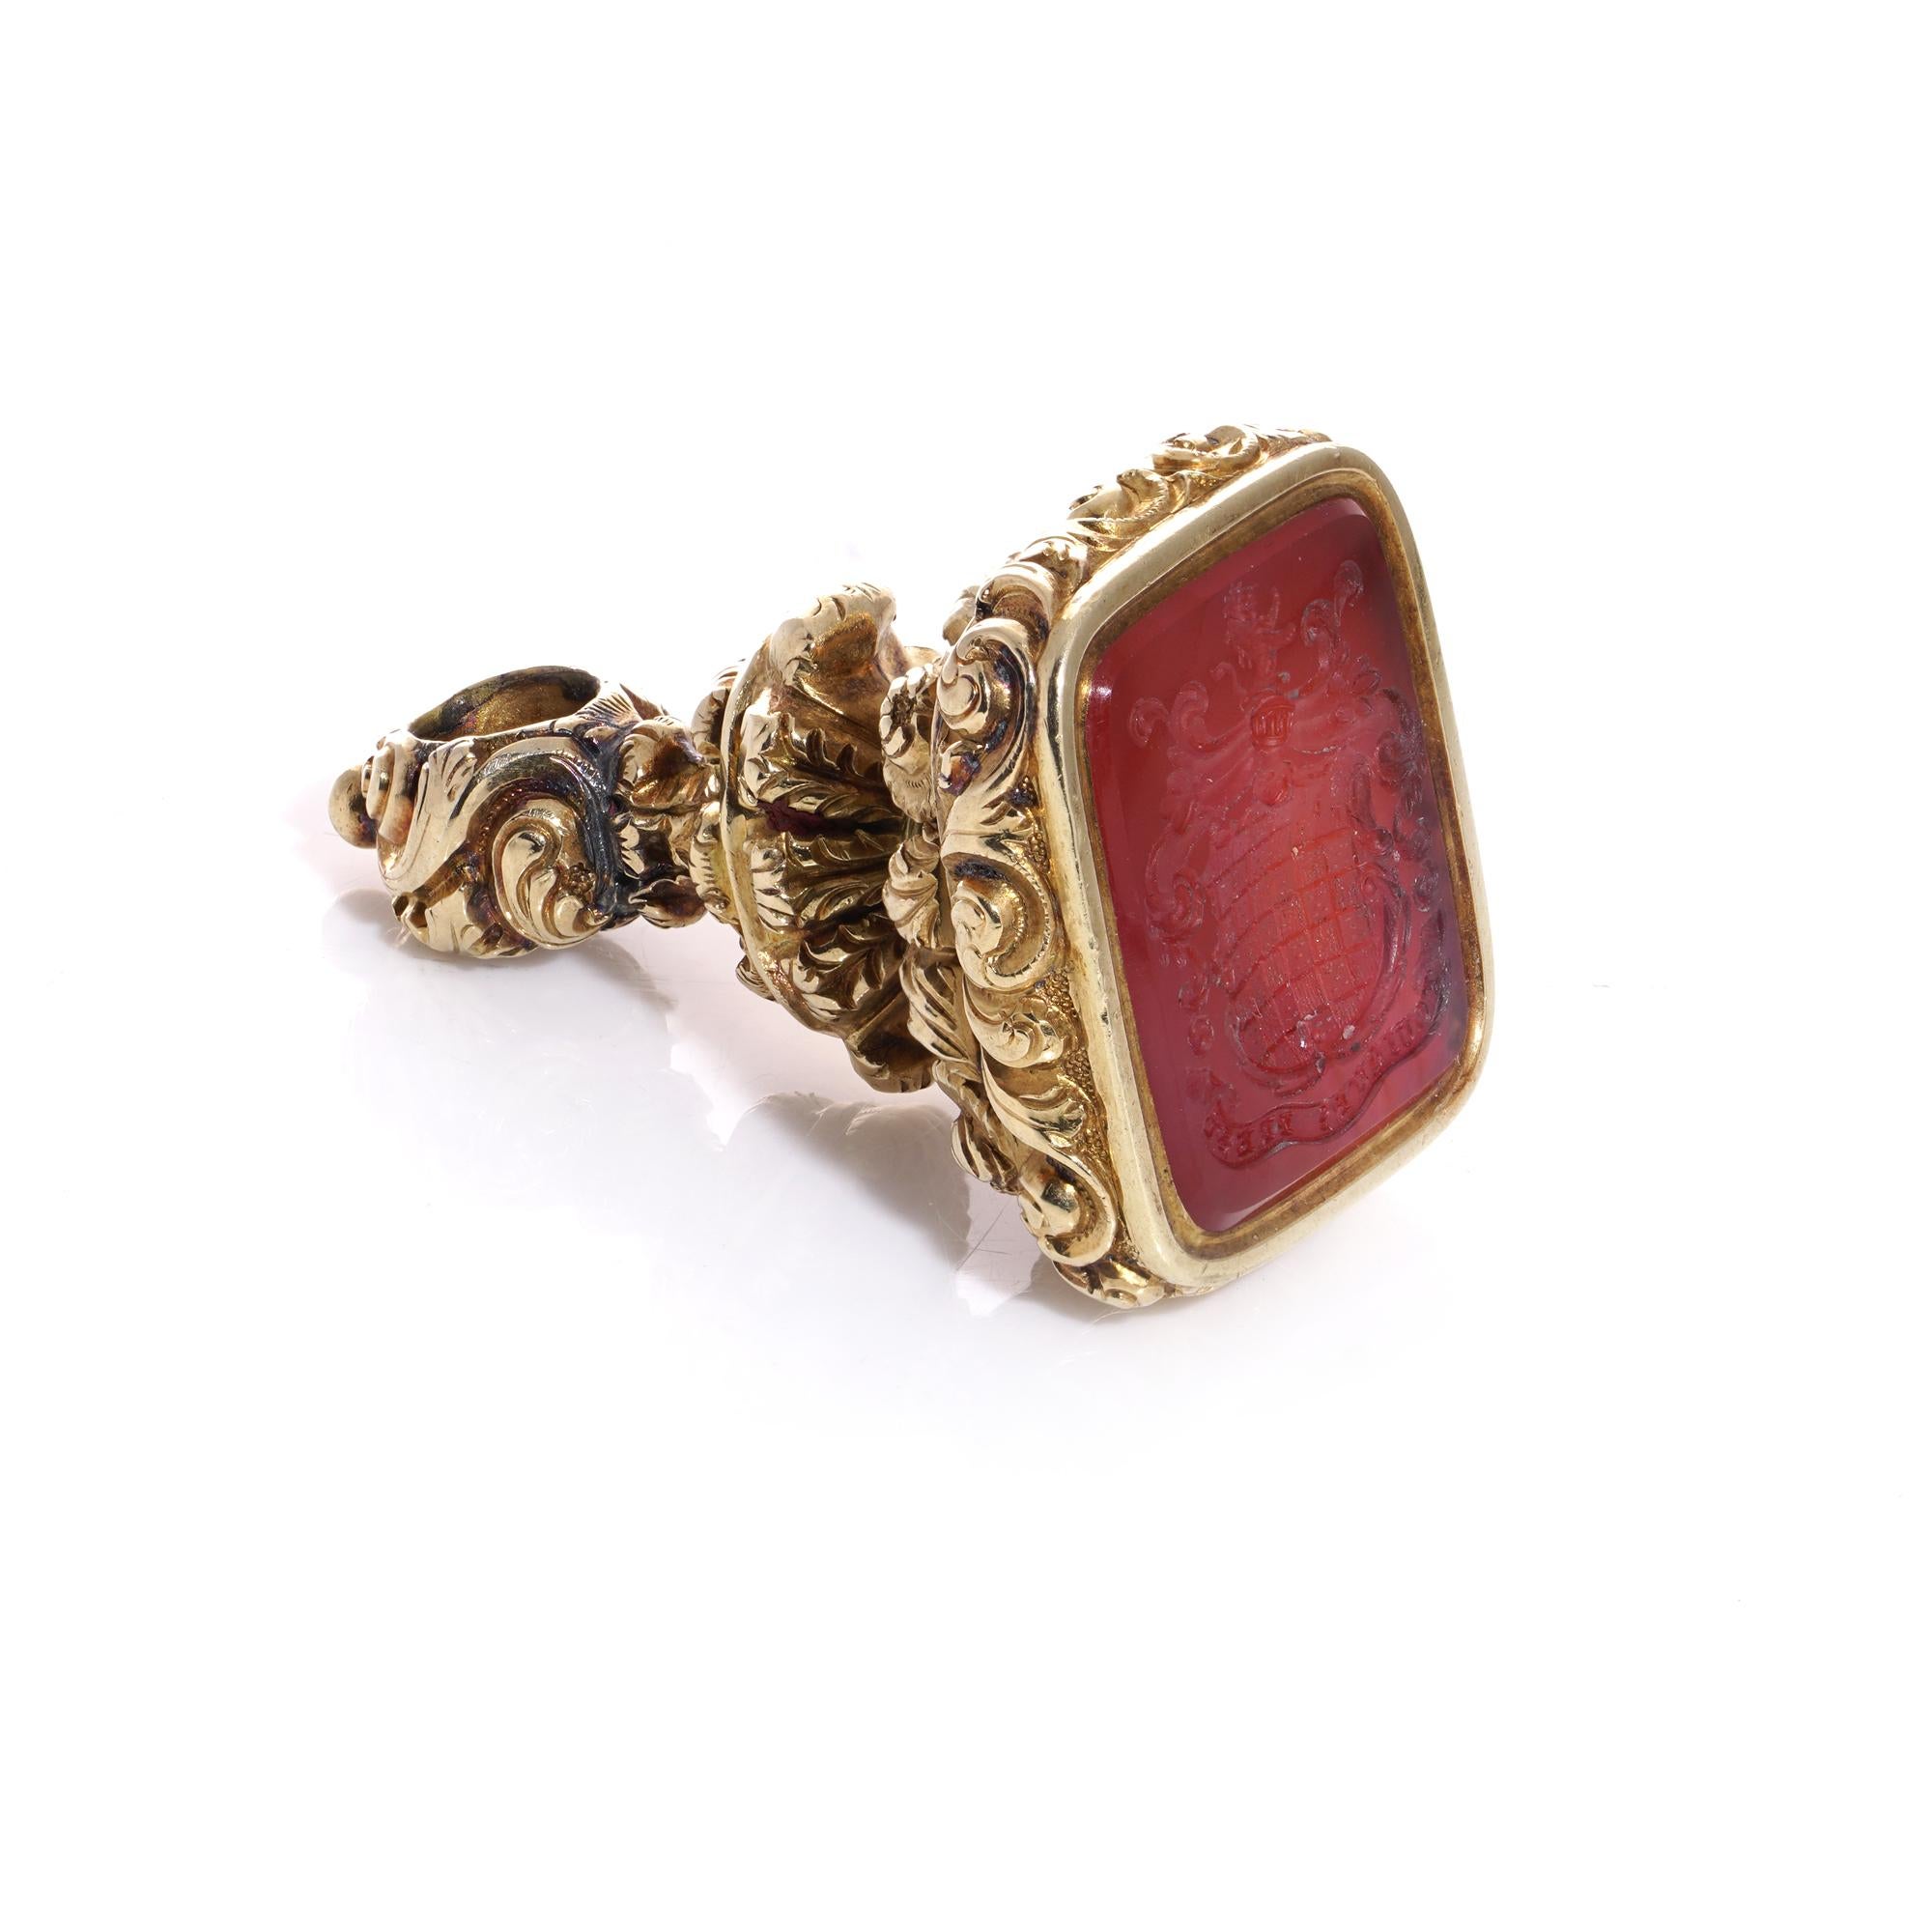 Victorian 15kt. gold seal fob with carnelian intaglio and family motto 1